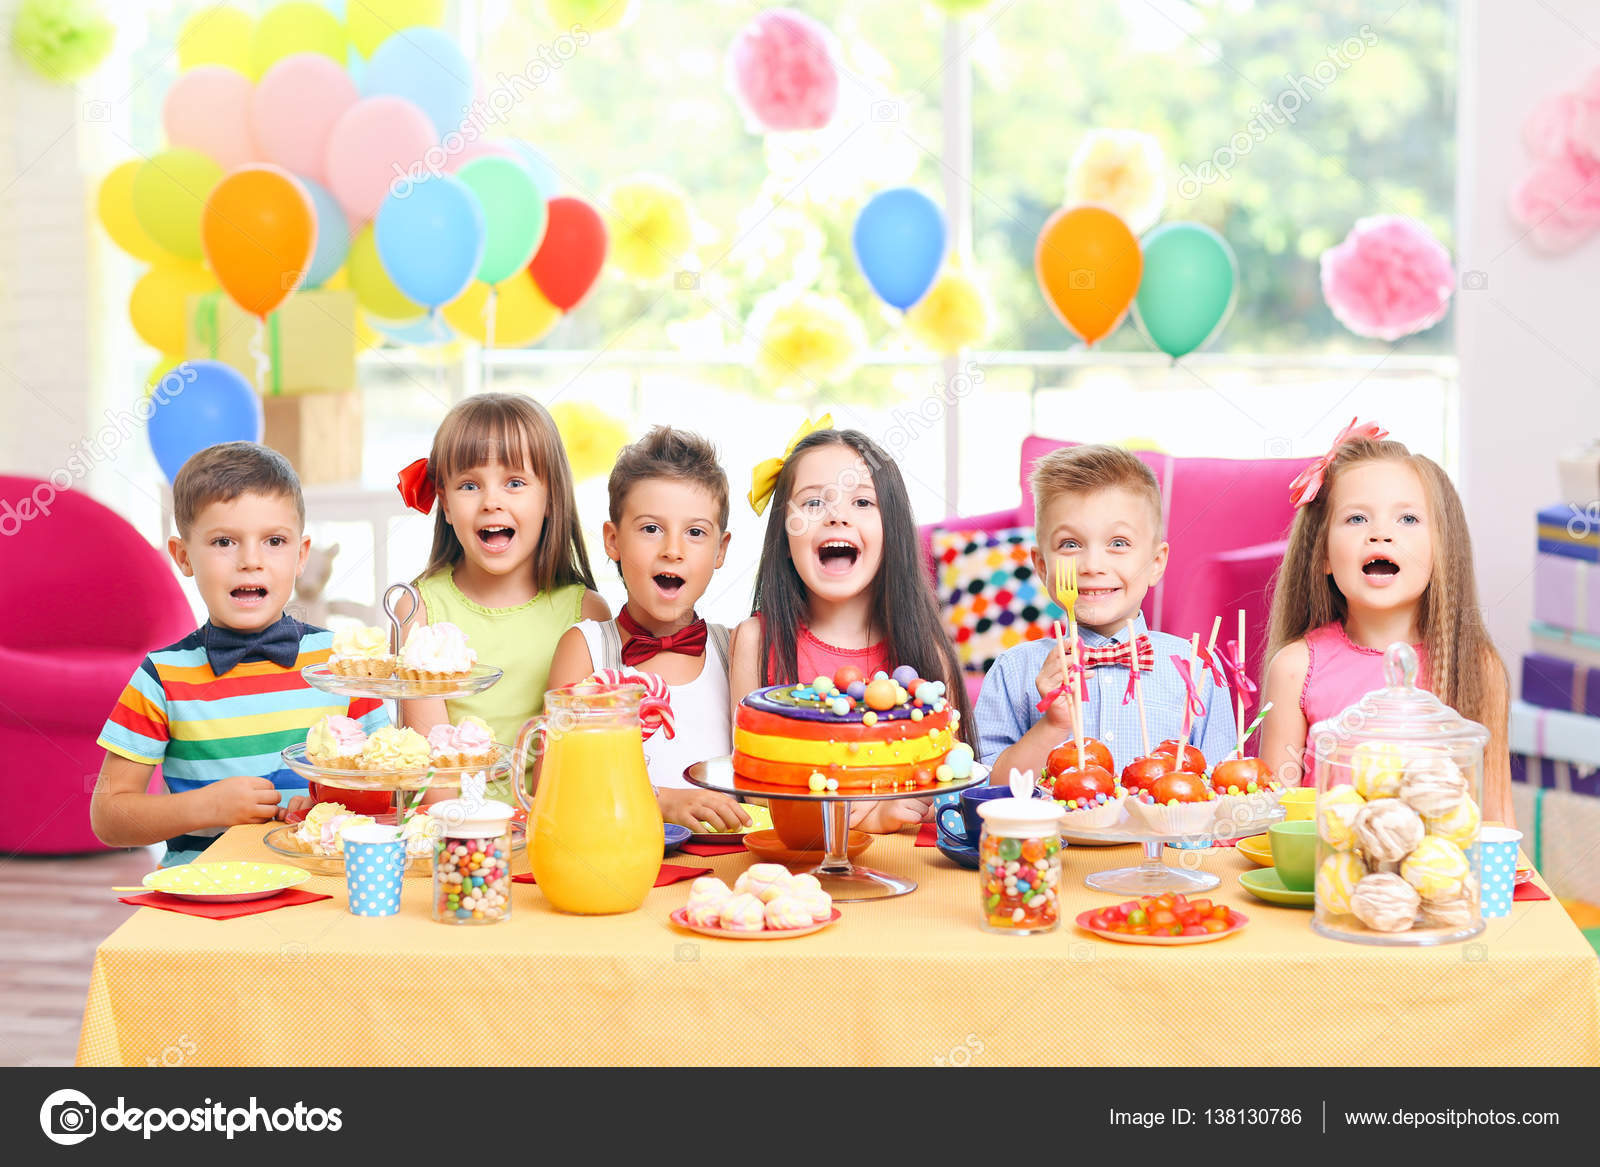 Children's Funny Birthday Party Decorated Room Stock Photo by ©belchonock  138130786